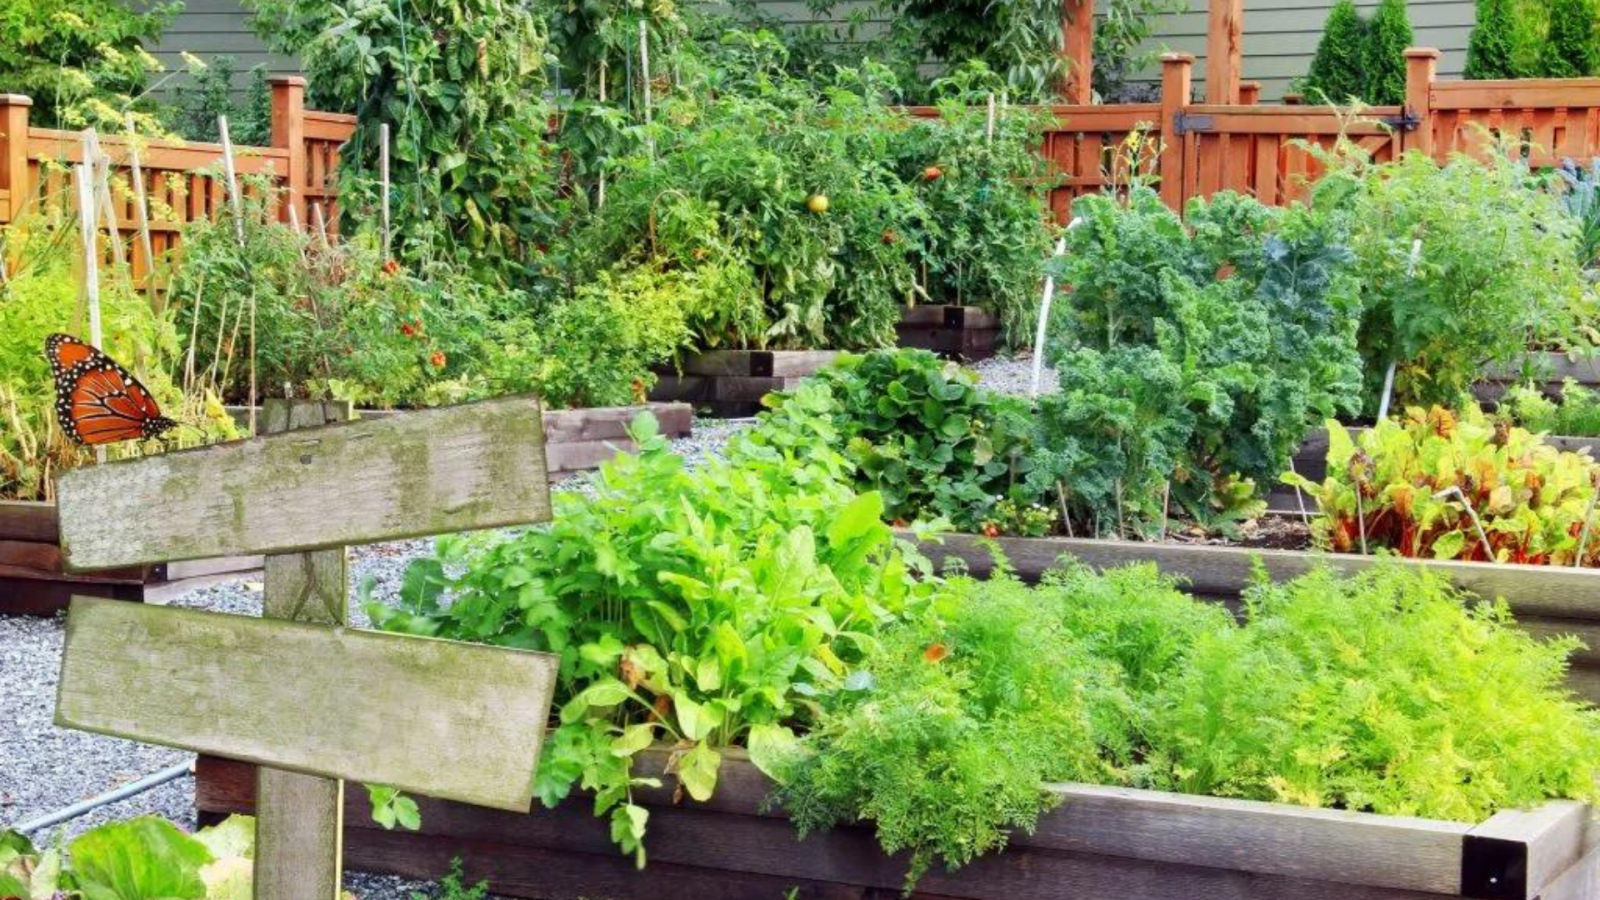 Your complete guide to creating and maintaining a one-stop kitchen garden to fulfil your culinary needs